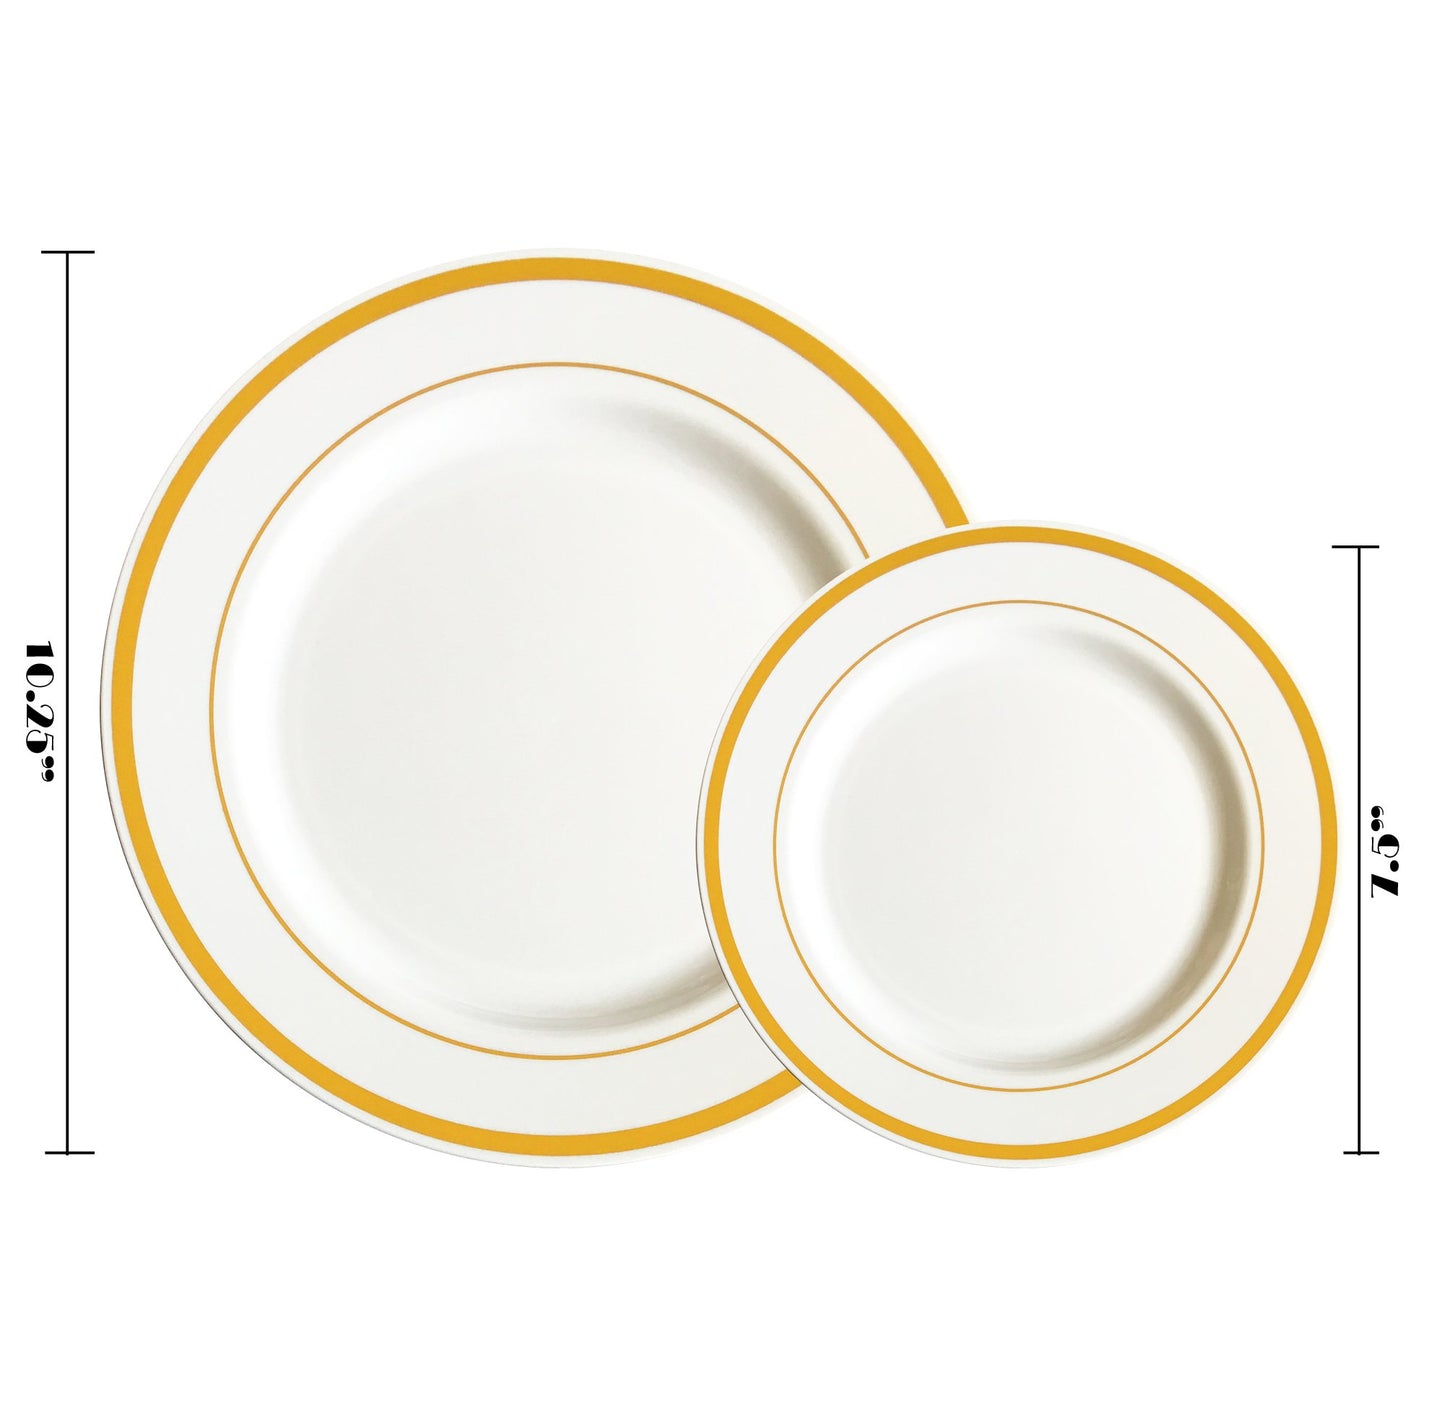 JL Prime 50 Piece Gold Plastic Plates for 25 Guests, Heavy Duty Reusable Disposable Plastic Plates with Gold Rim for Party and Wedding with 25 Dinner Plates & 25 Salad Plates